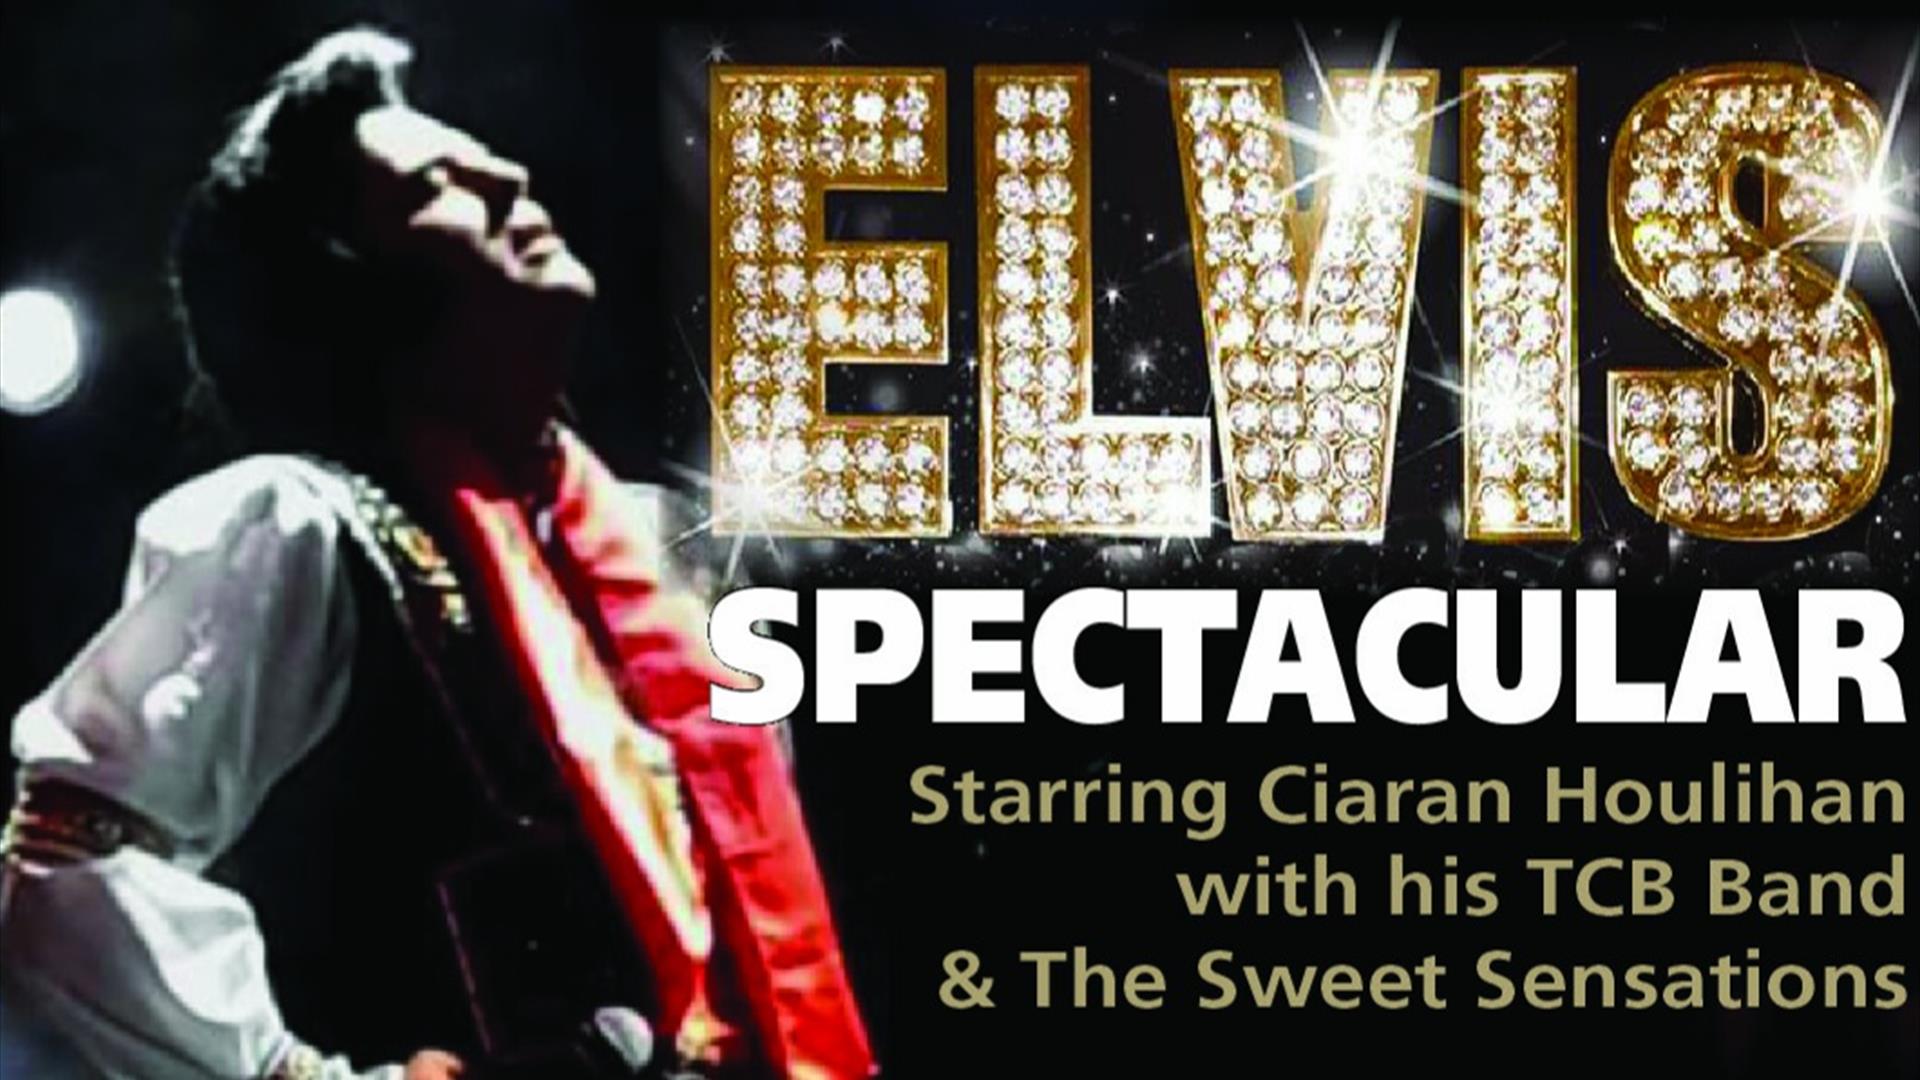 The Elvis Spectacular Show Downpatrick Visit Mourne Mountains